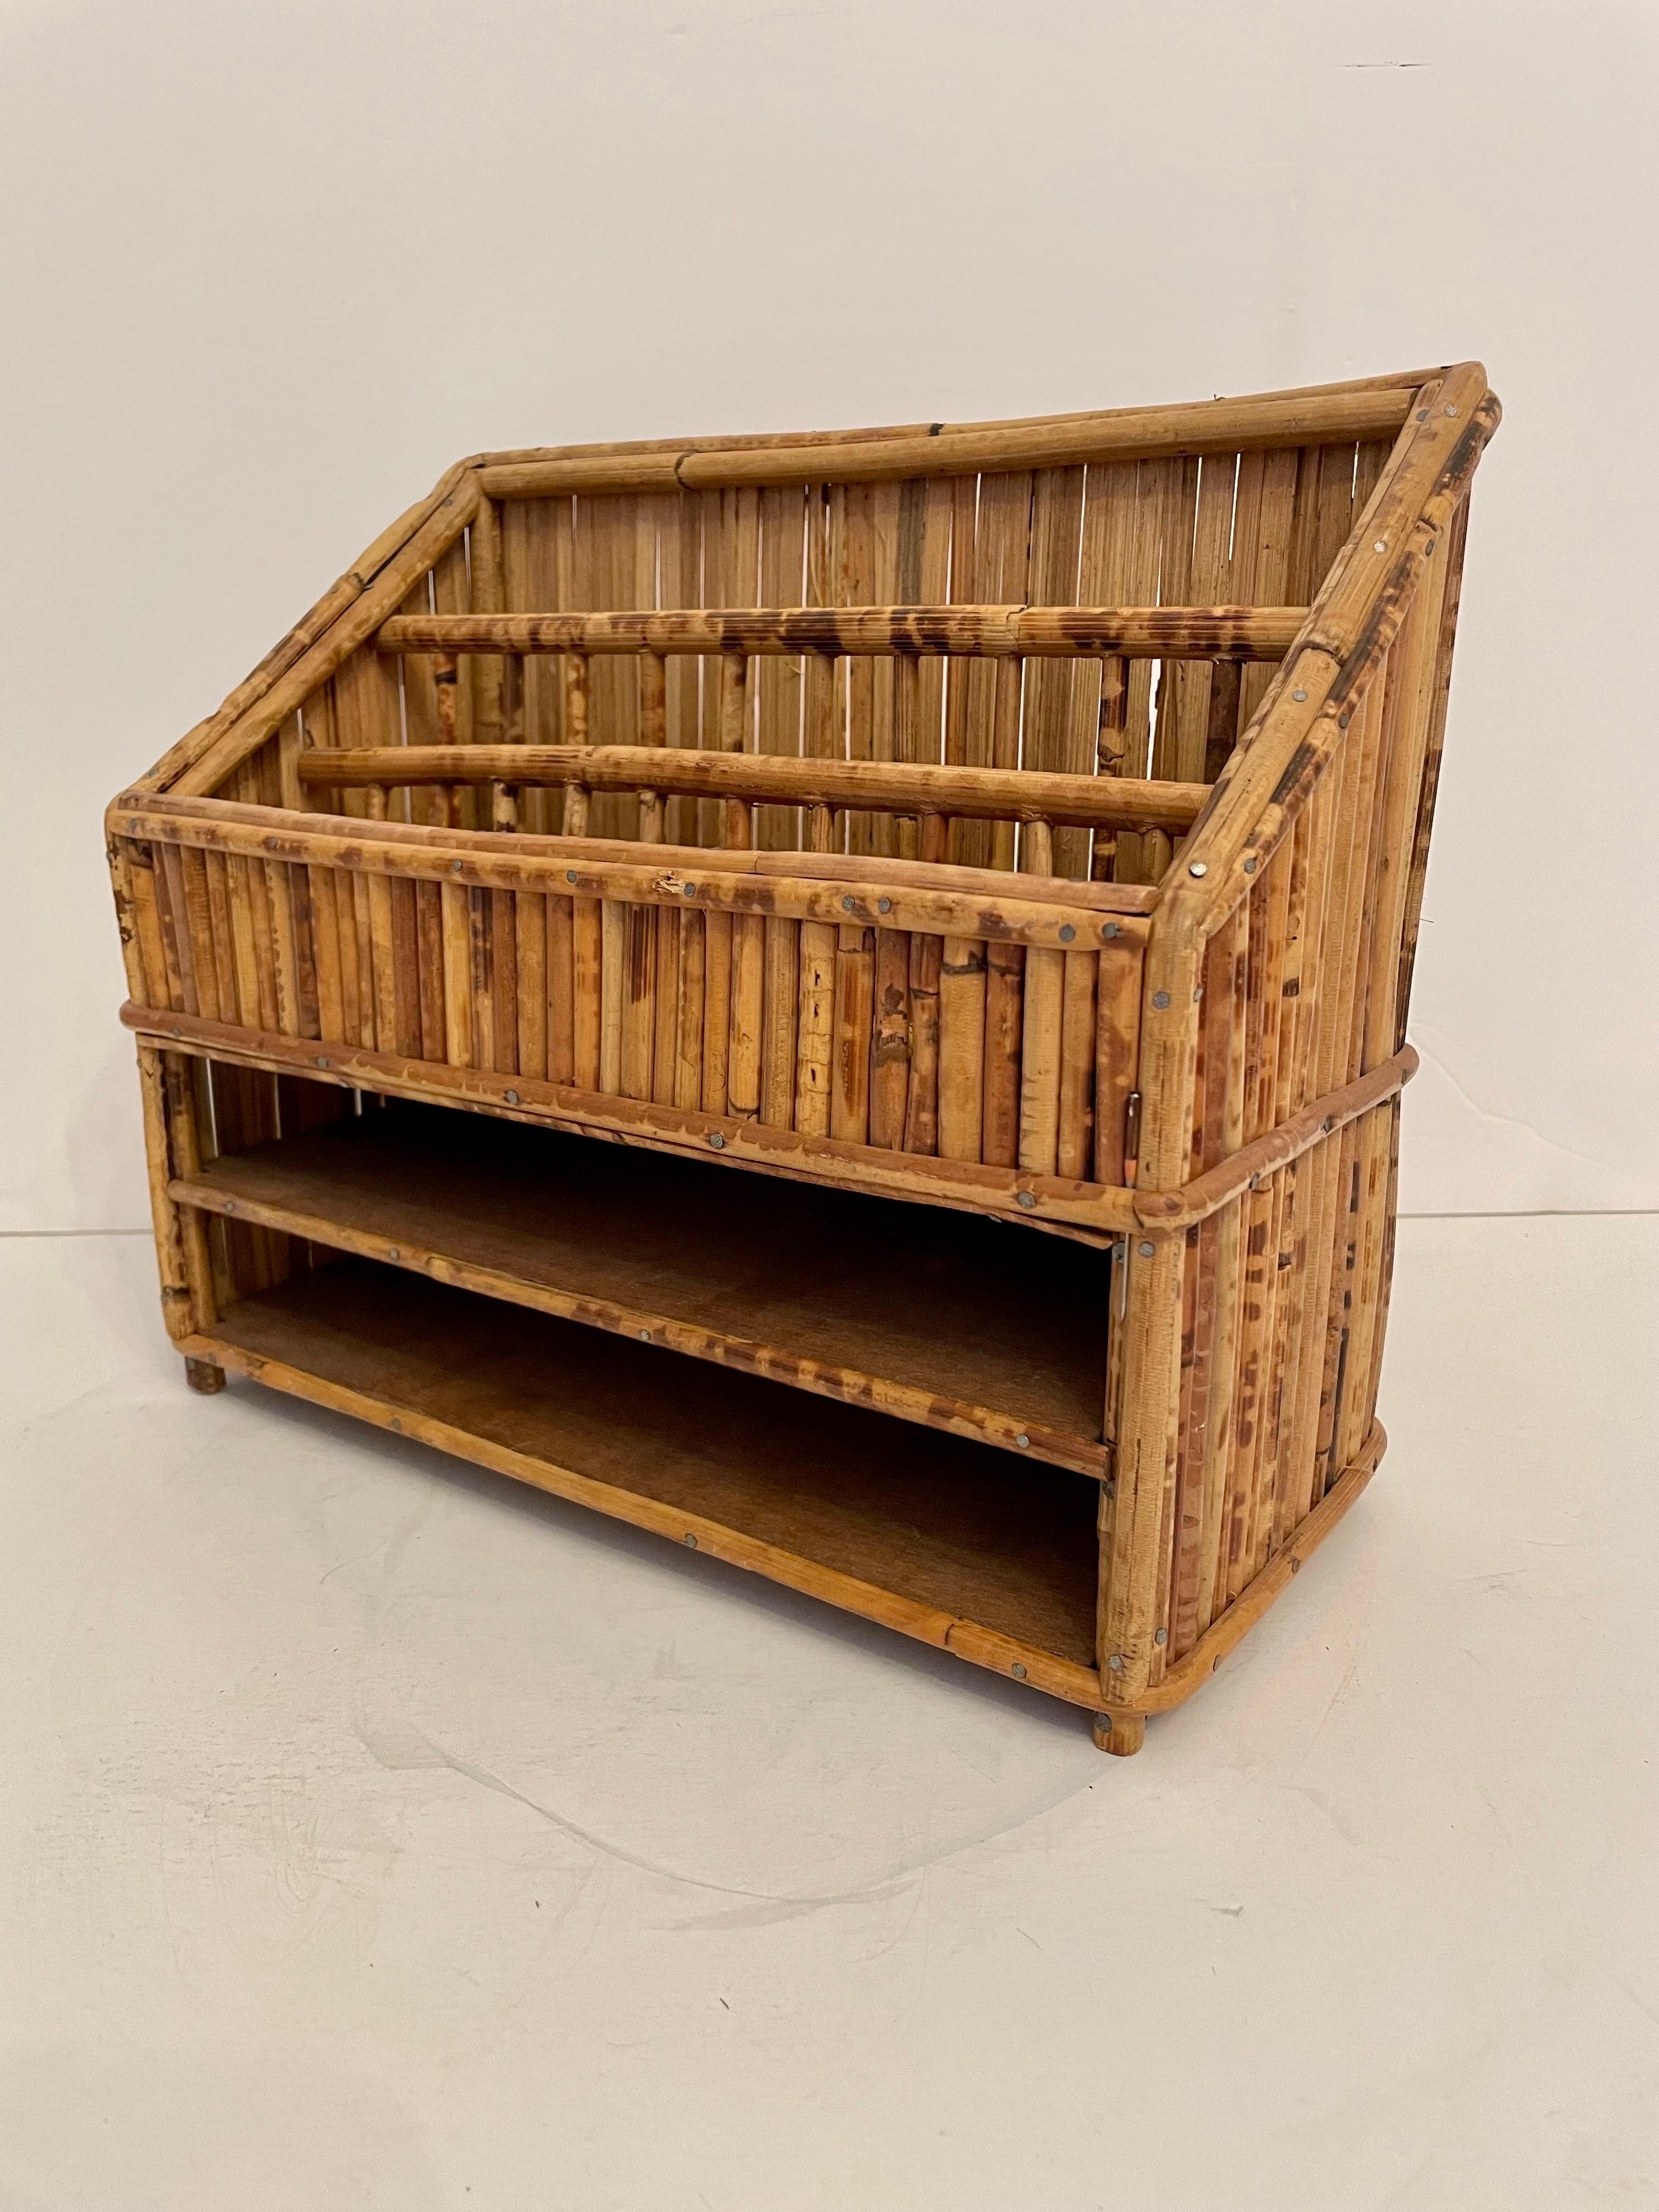 Vintage Bamboo Letter Holder or Desk Organizer. Three compartments on top and two large shelves on bottom. Good condition and sturdy, ready to use. 11